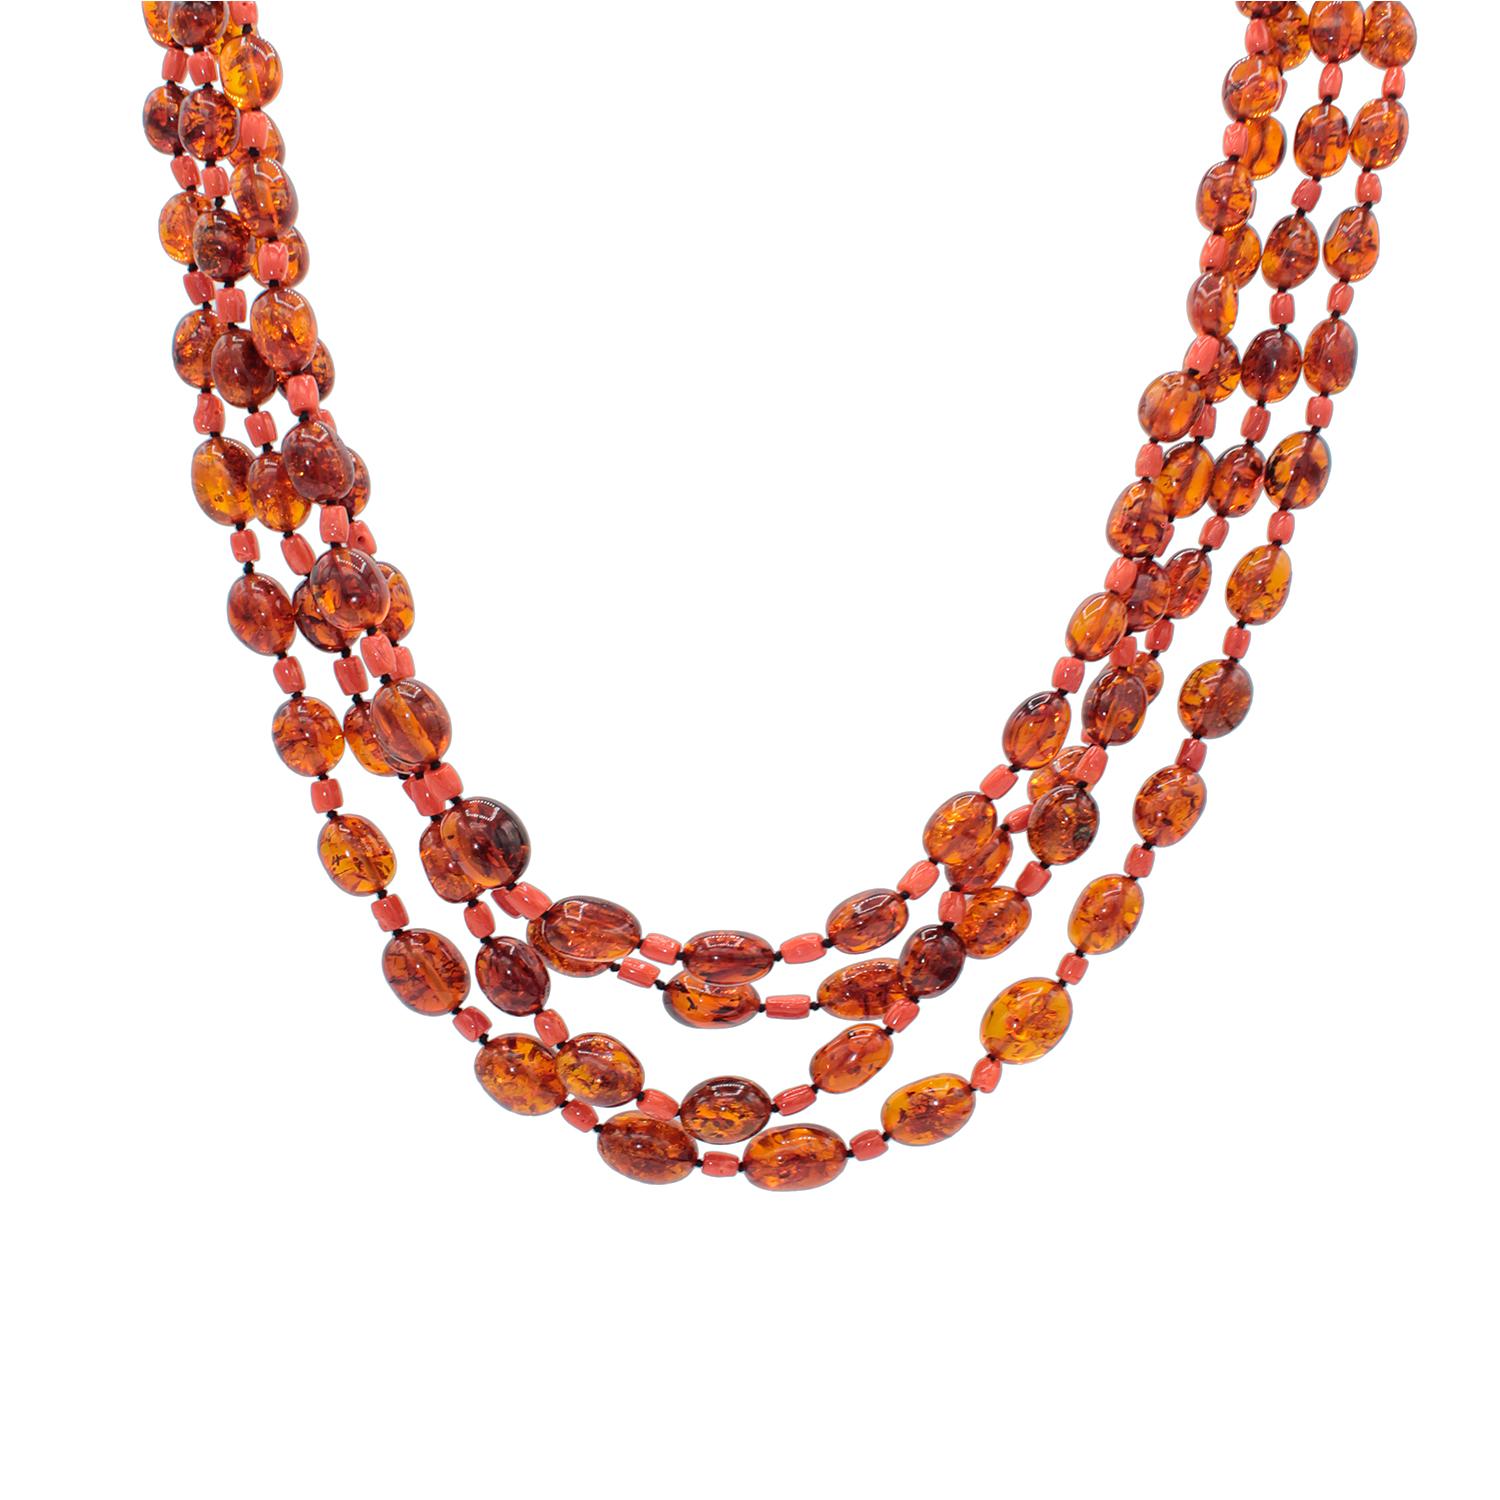 Multistrand necklace realized in natural amber, red coral and bakelite clasp
n. 4 graduated strands
Red Mediterranean Coral (Corallium rubrum)
Natural Baltic Amber
Bakelite clasp
Total lenght cm 44 ( including clasp) 
